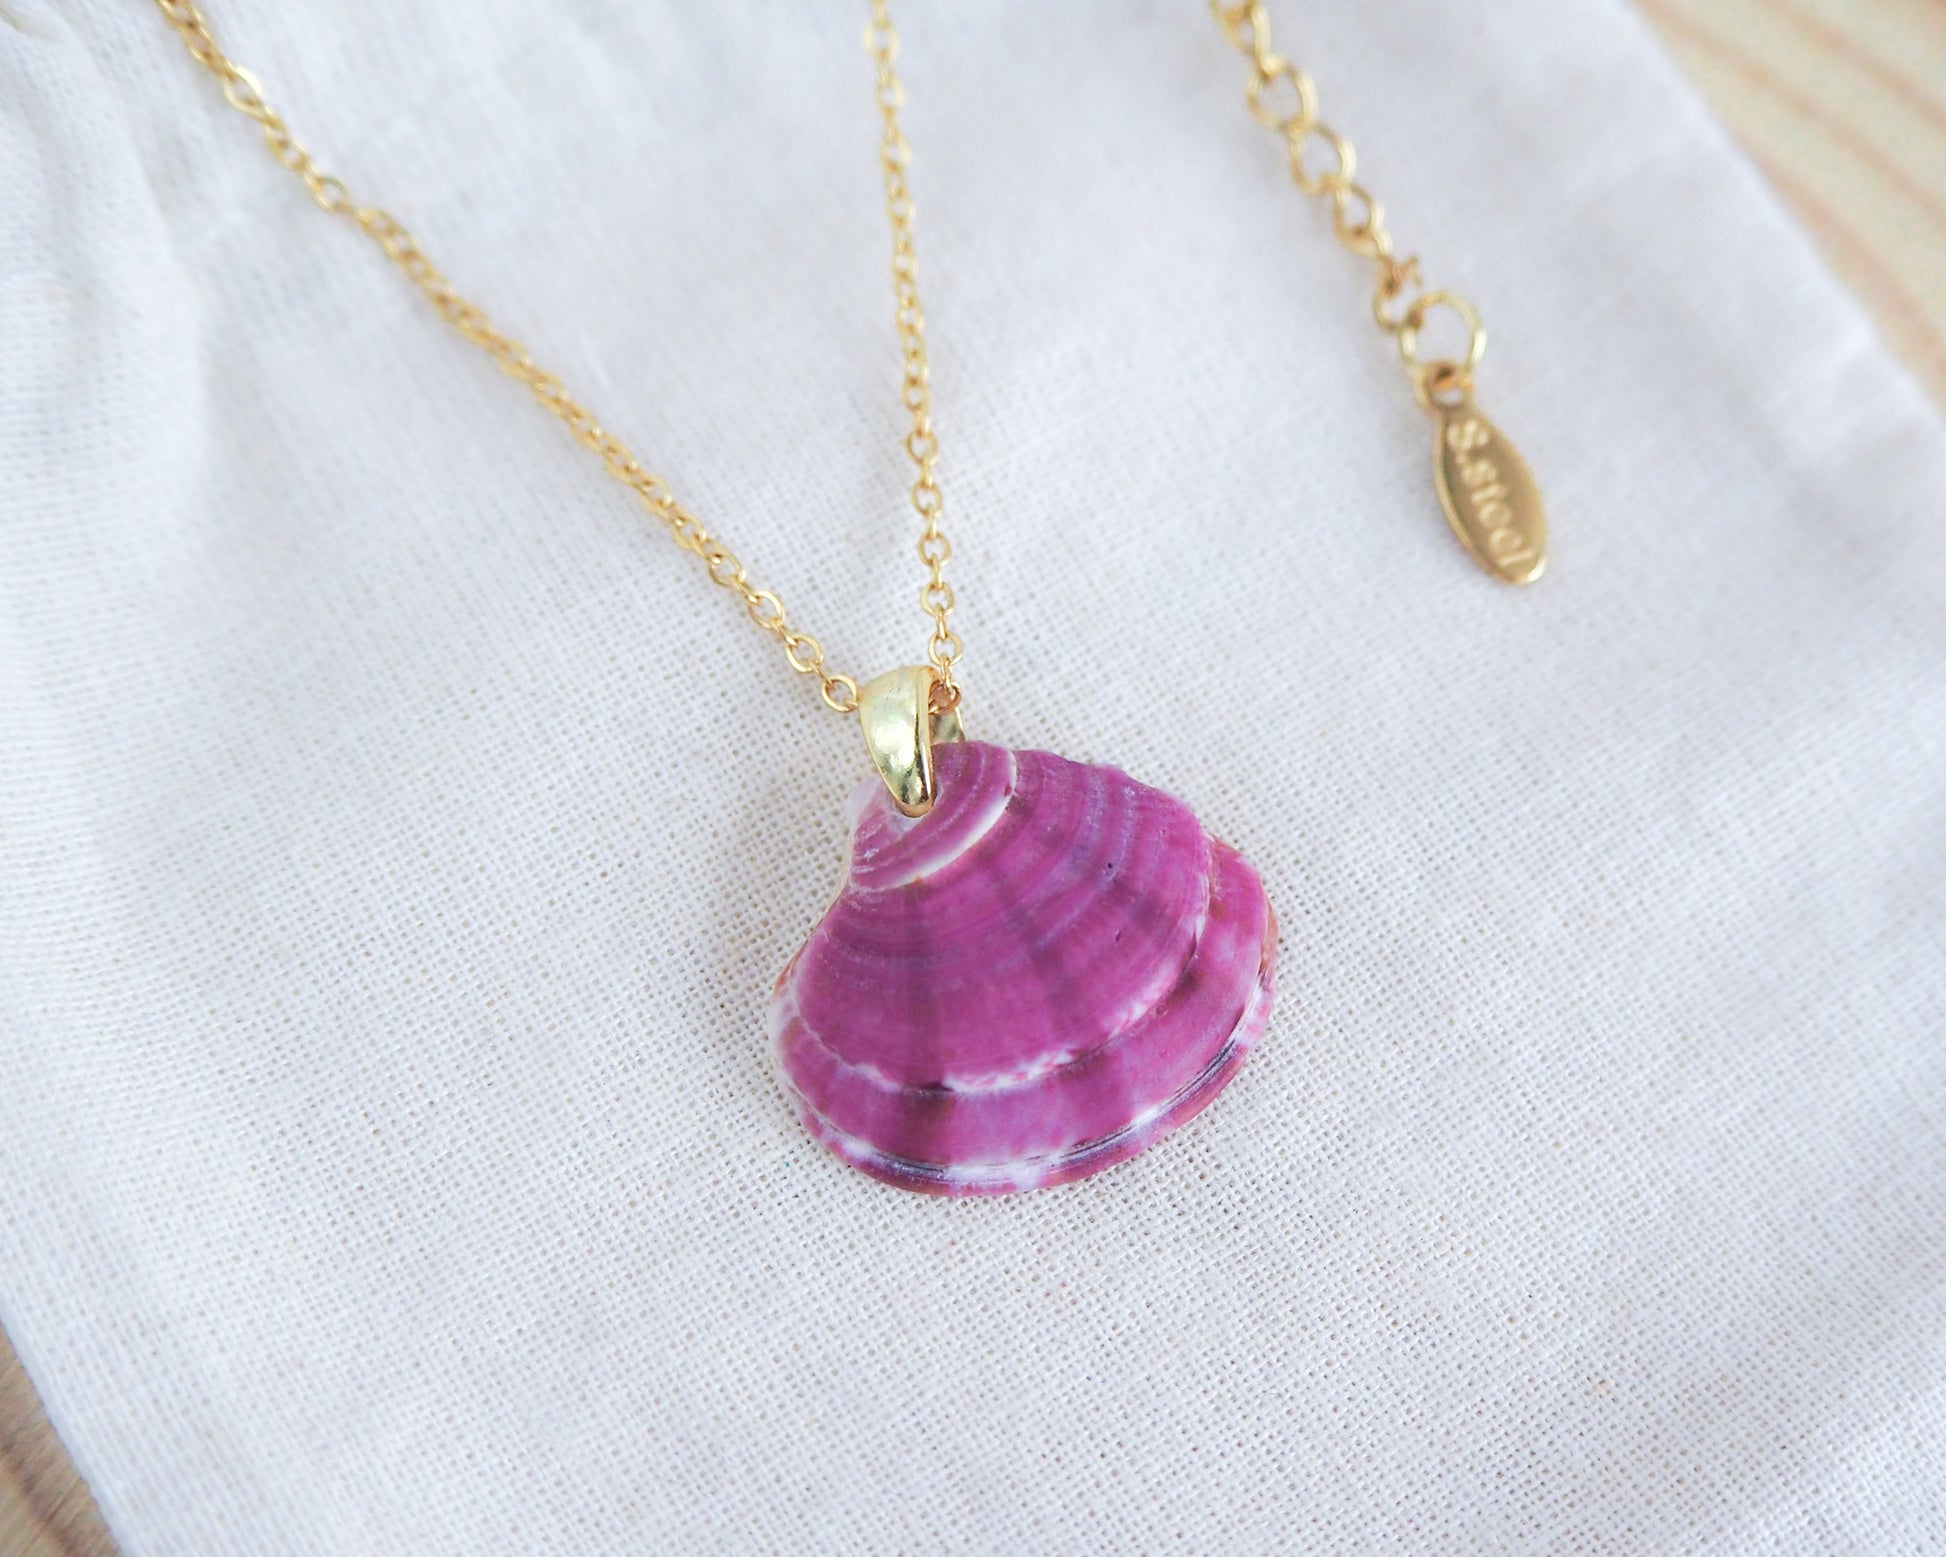 Gold Purple Plum Venus Shell Necklace from Portugal, seabylou ocean inspired jewelry, real shell necklace